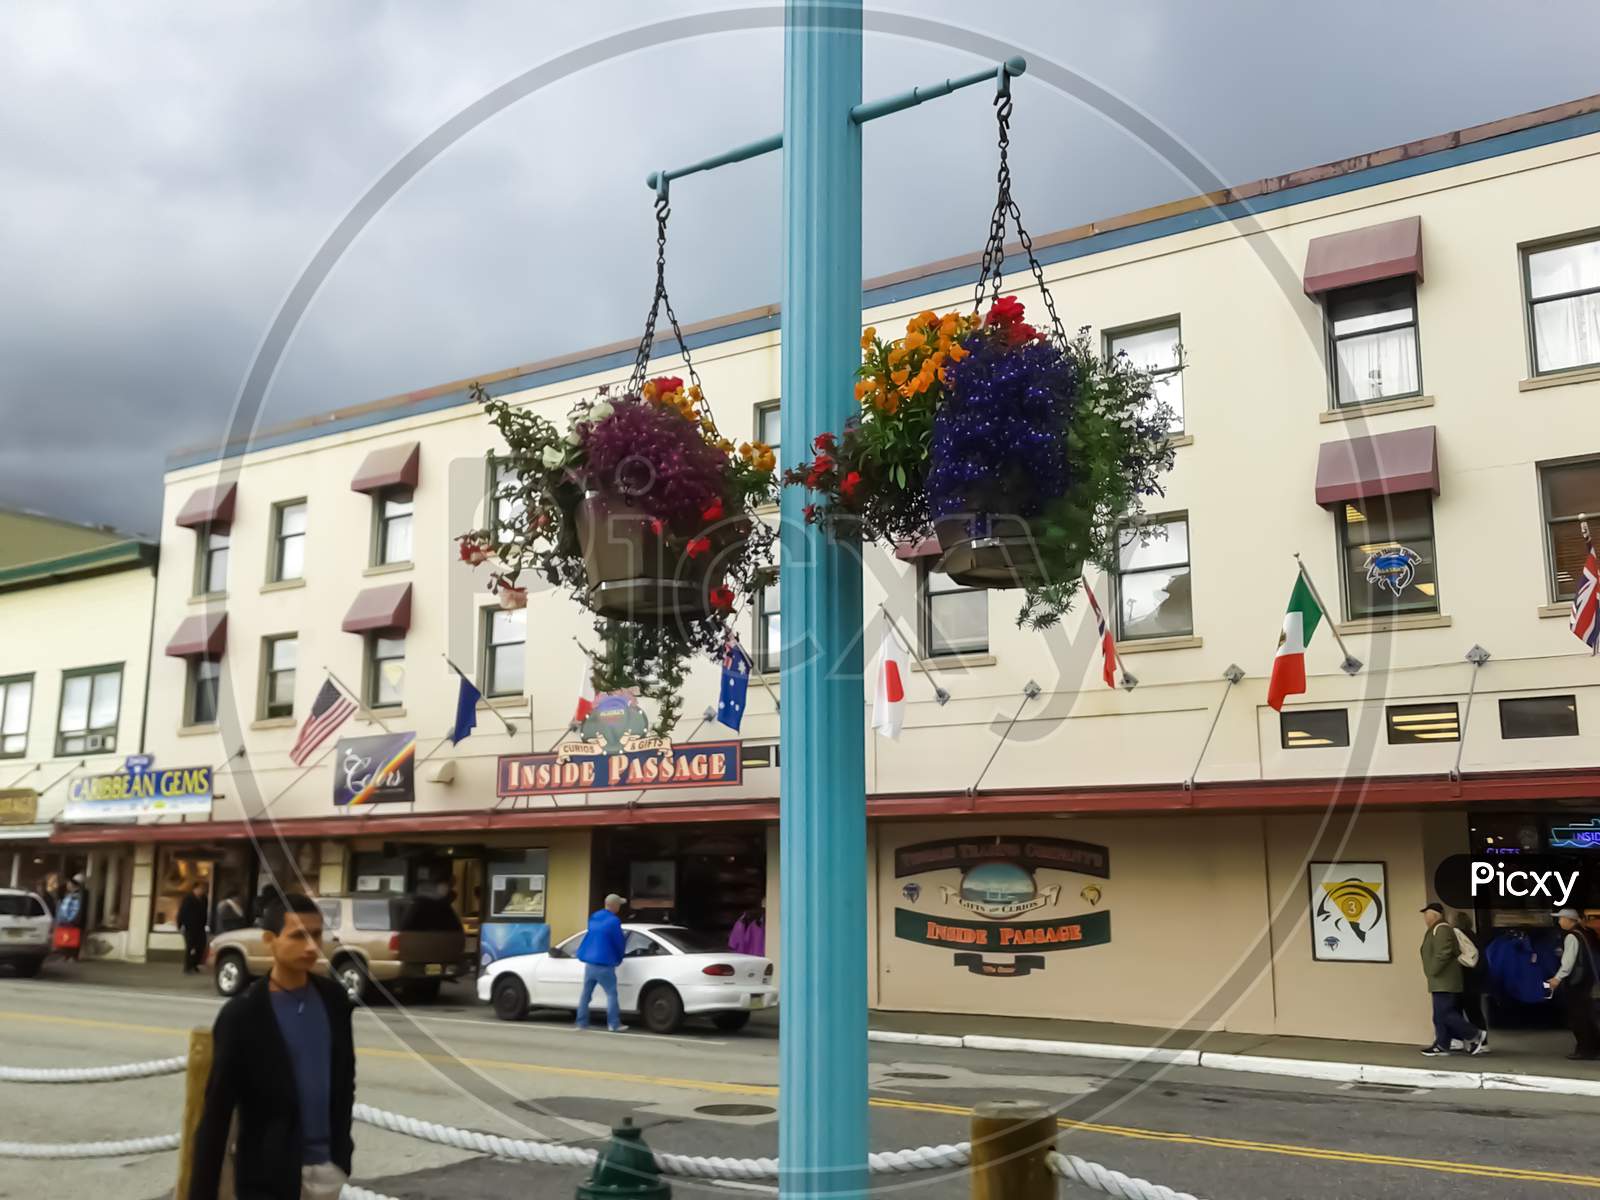 7/4/2014 ,Ketchikan ,Alaska ,Usa ,A View Of Street Near To Cruise Port ,View Of Street ,Tourists And Shops